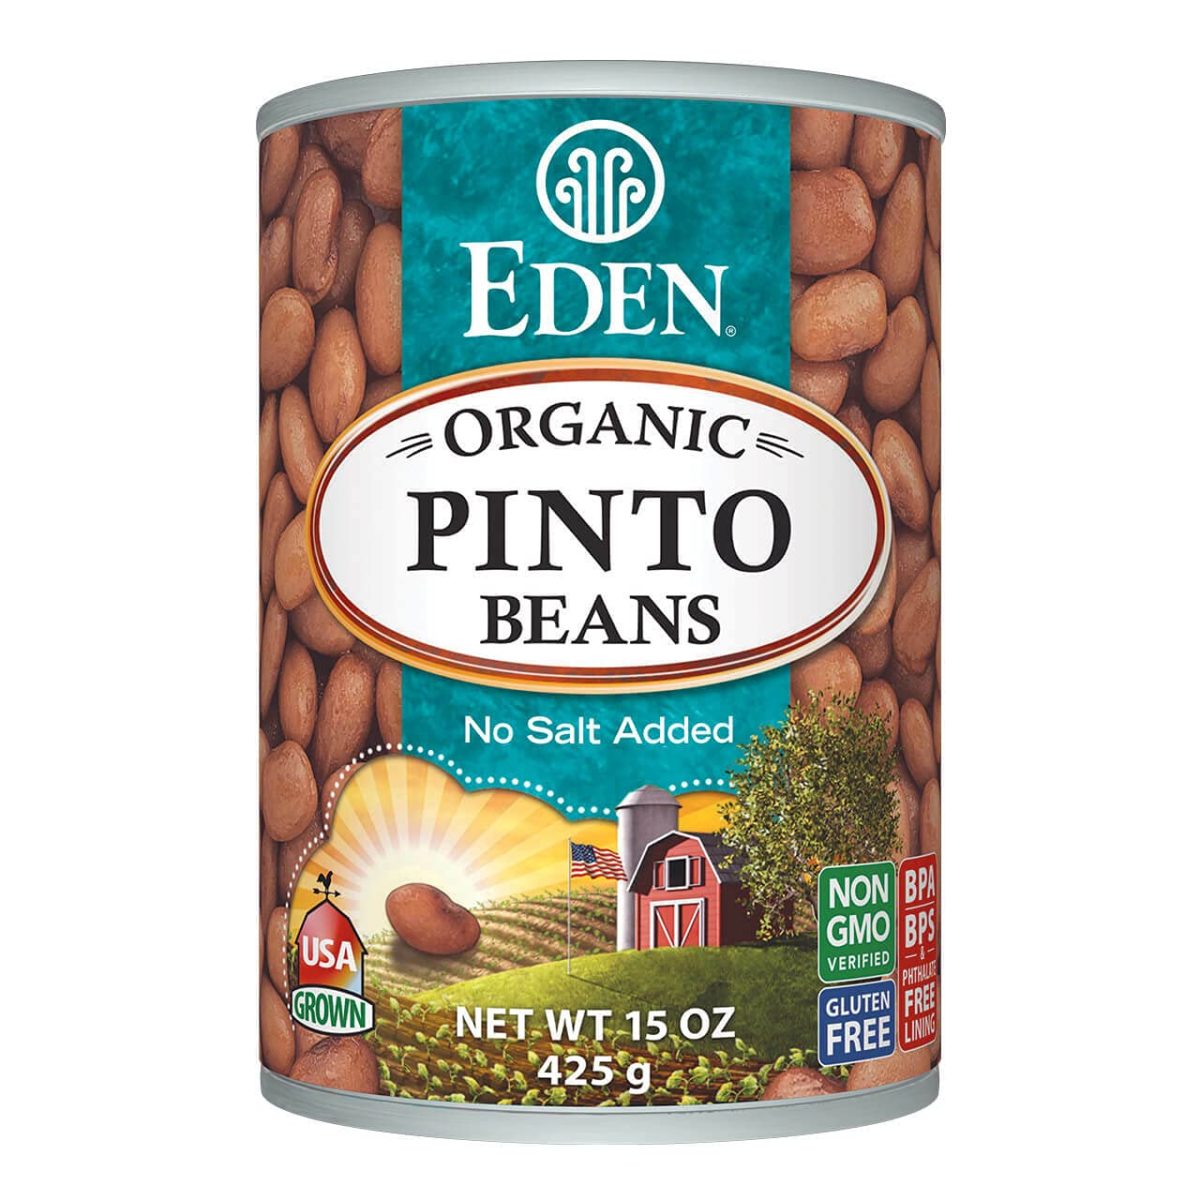 Use pinto beans as a substitute for adzuki beans